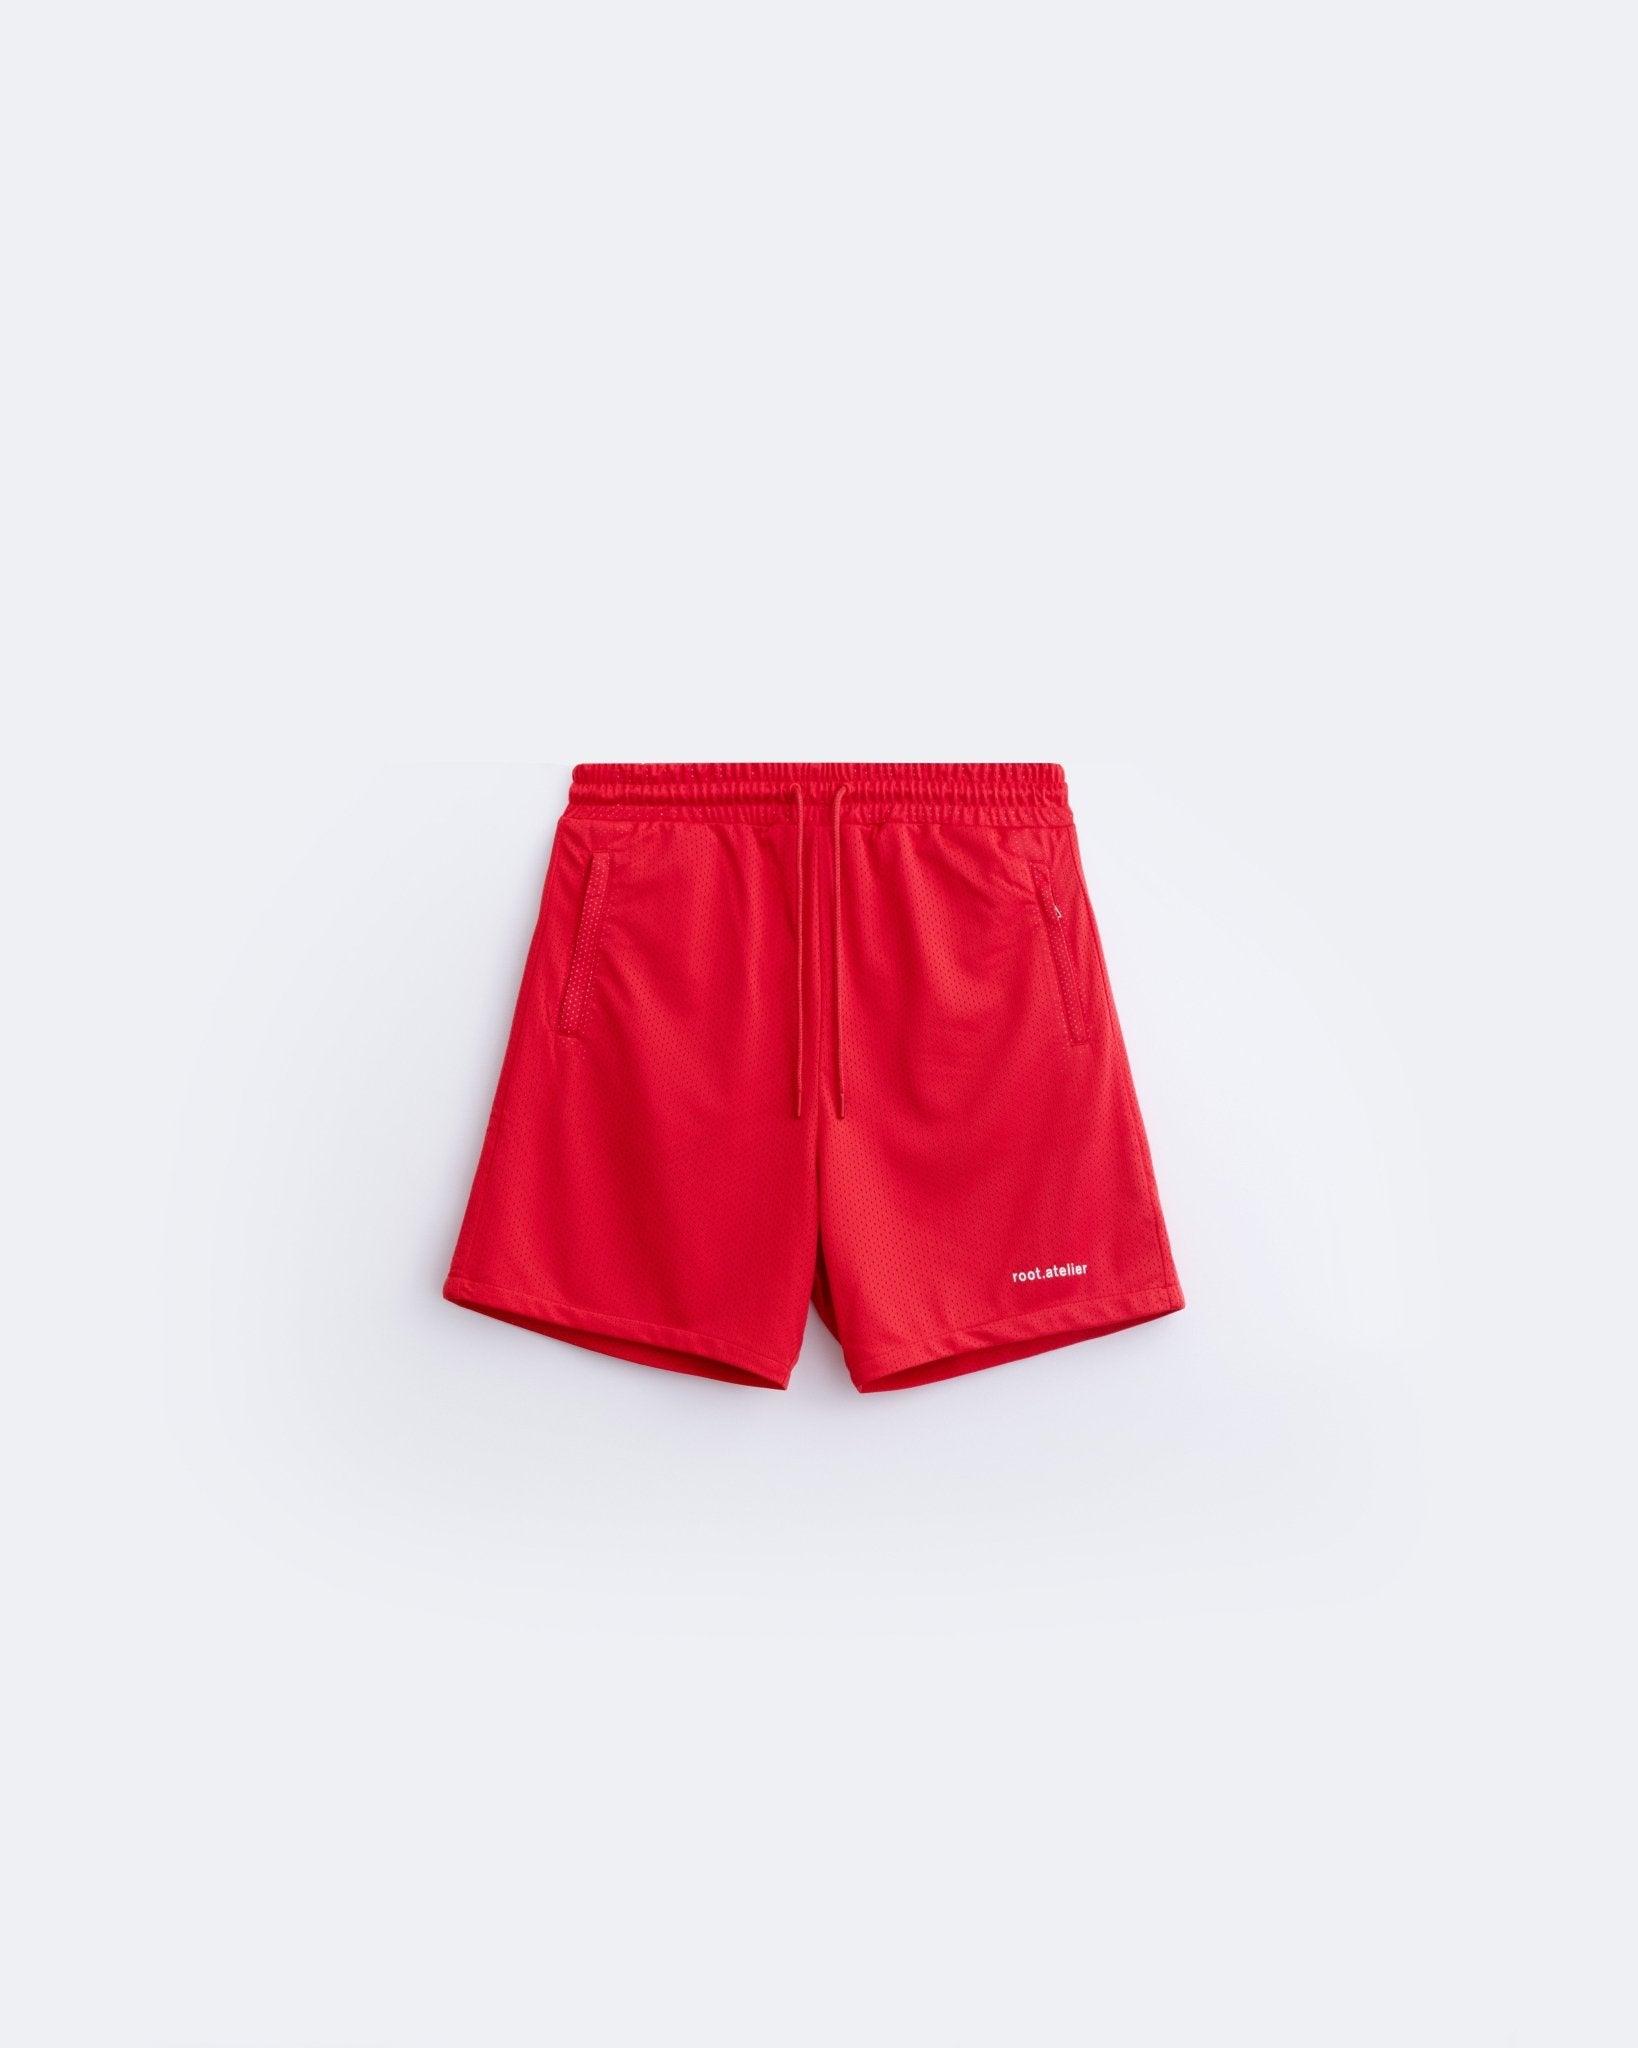 Root Mood Carmine Mesh Shorts - Root Atelier™ by Eugen Lods